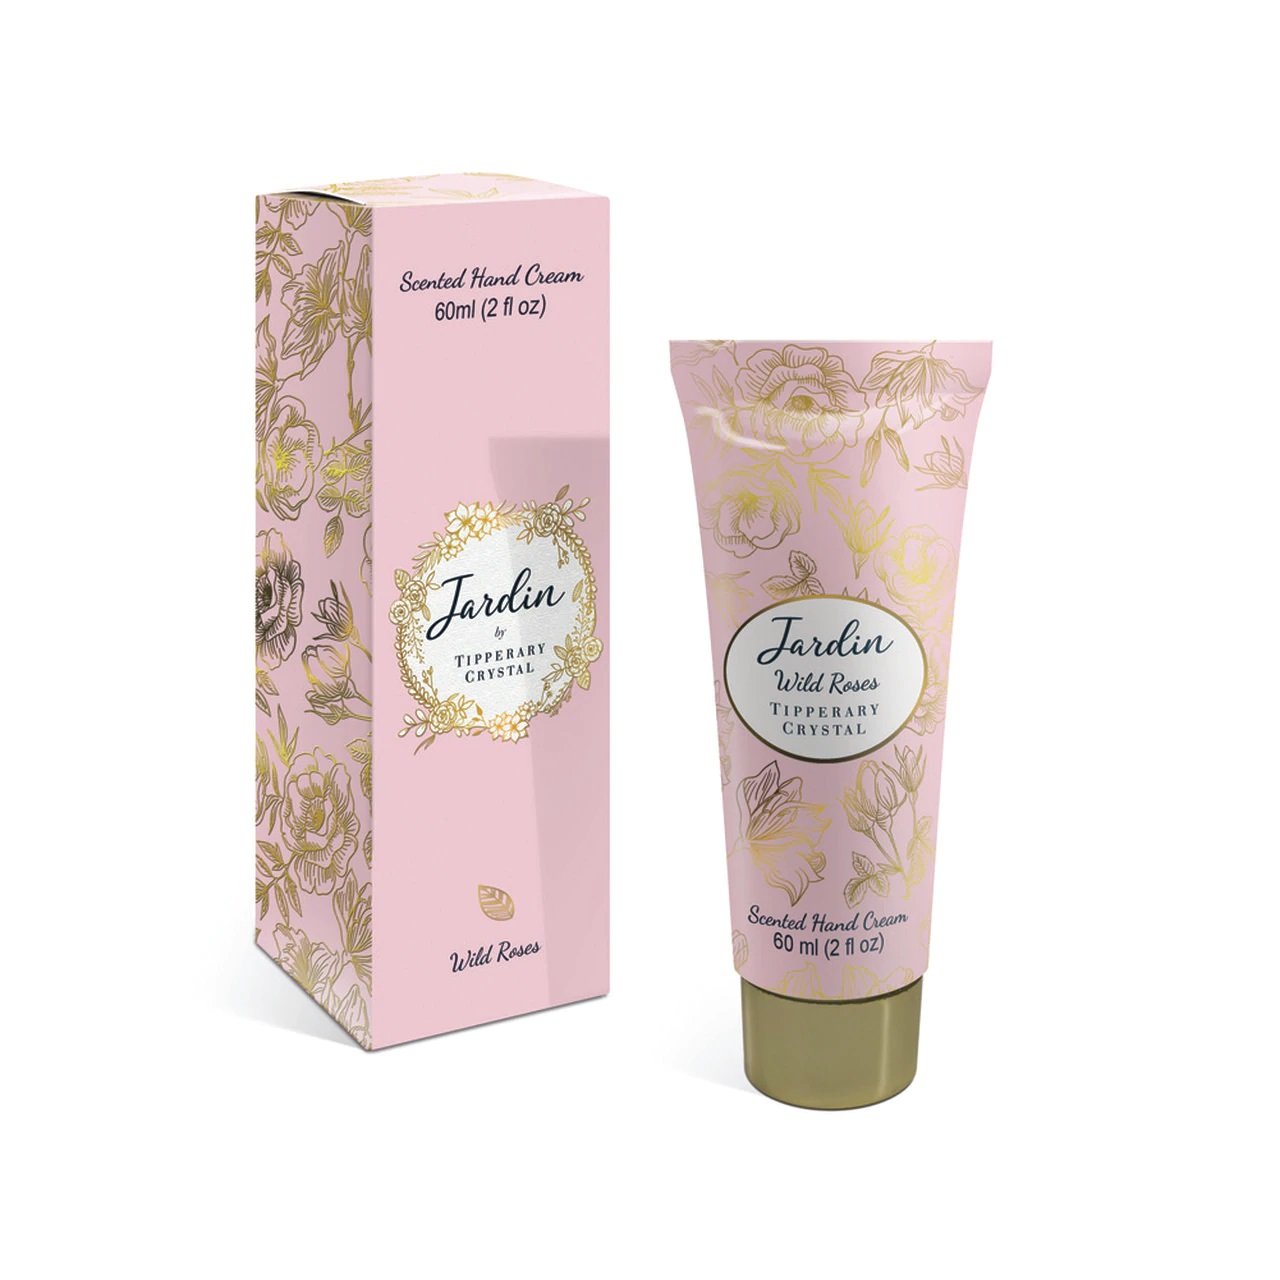 Tipperary Crystal Jardin 60Ml Handcream - Wild Roses  Gorgeous Jardin handcreams from Tipperary Crystal are the ultimate pampering treats and would make a lovely gift for someone special.